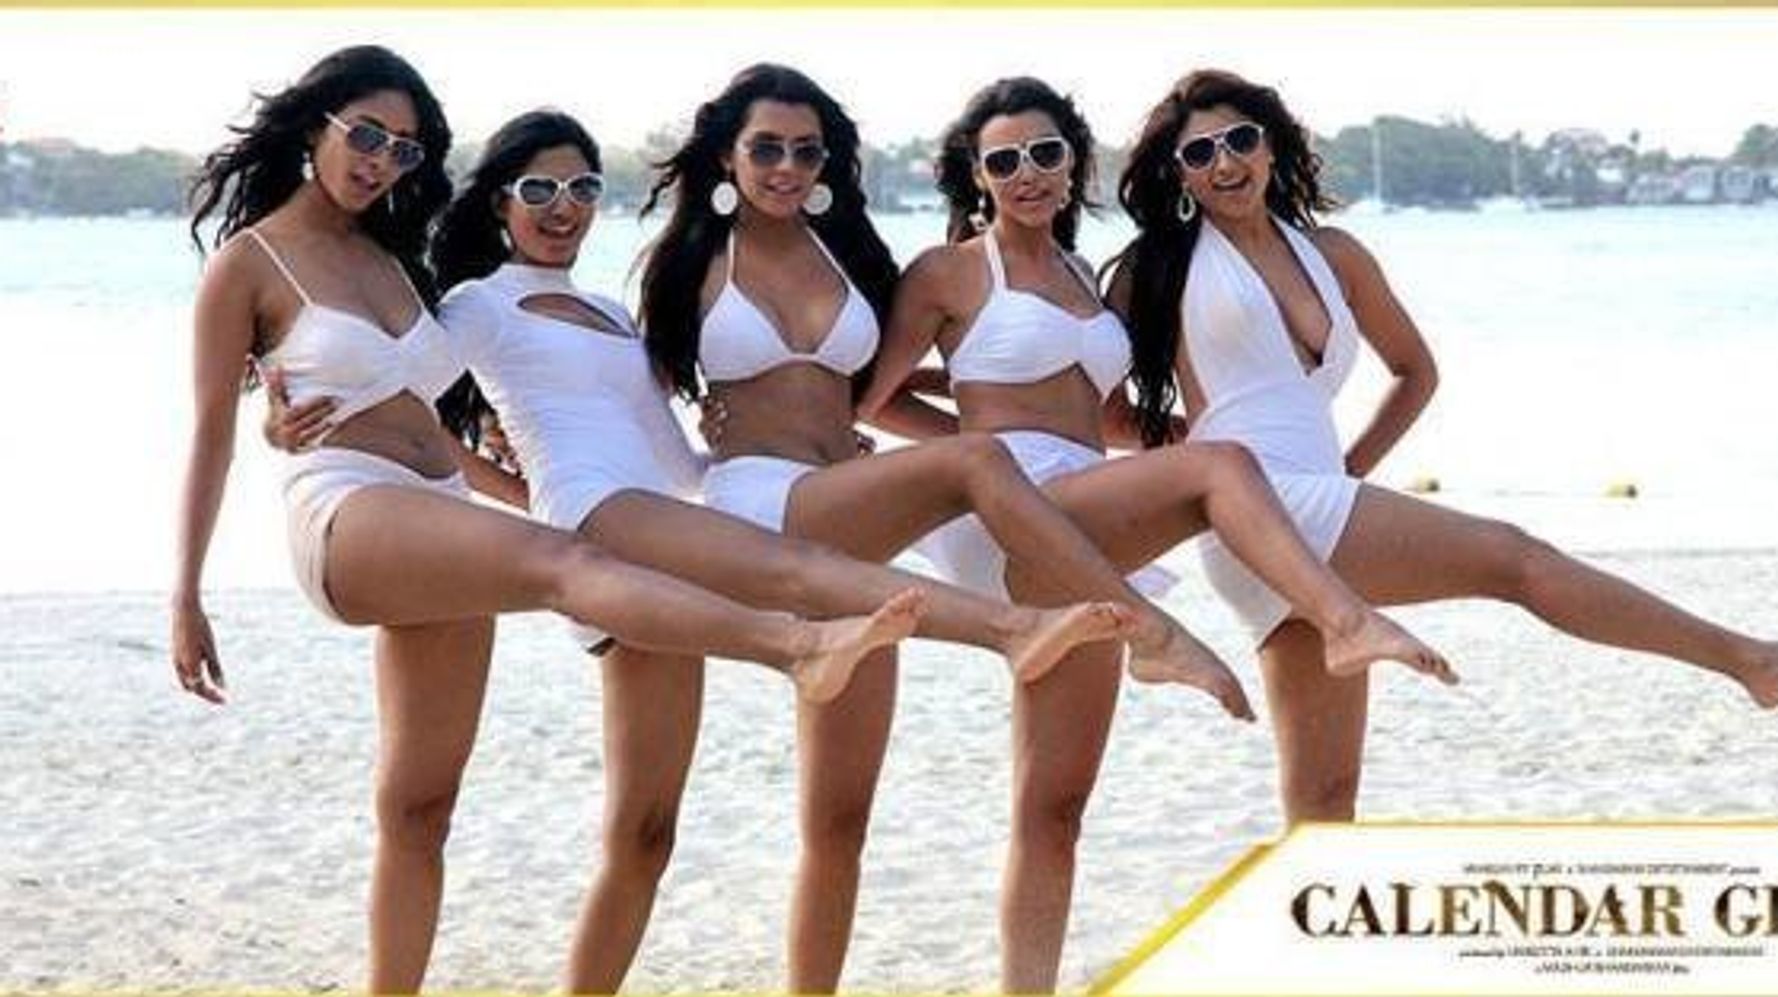 Do You Want To Be A Calendar Girl? 5 Useful Tips From Madhur